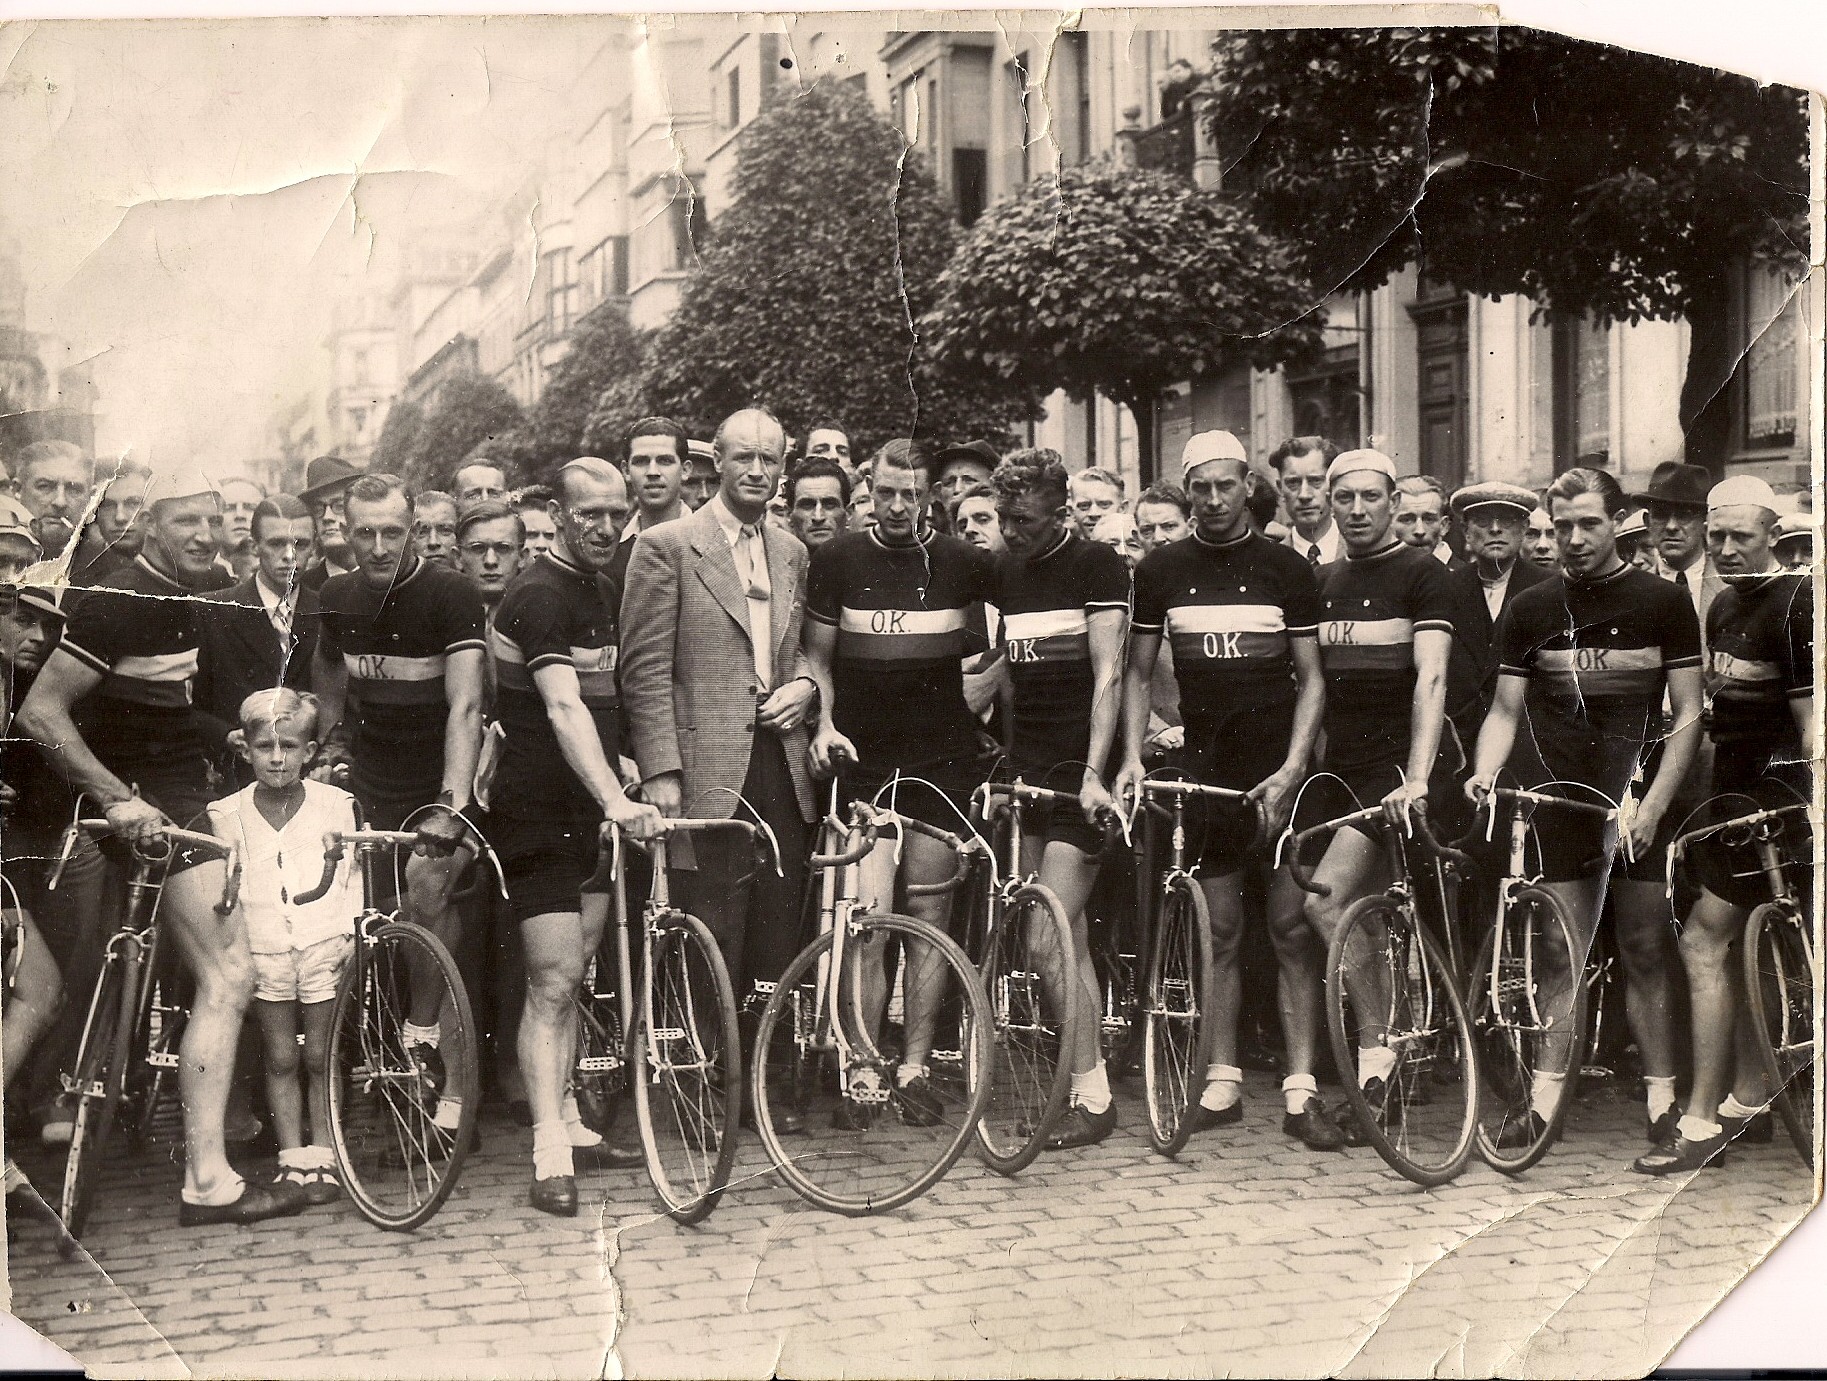 OK pro team circa 1947.  Left to right:  Gerrit Schulte, Holland; Albert Hendricks, Belgium; Eugene Kiewit, Belgium; Jos Vinck, Belgium, Cycles O.K. owner and first lugless bike framebuilder; Karel Kaers, Belgium, World Pro Road Champion in 1934 at age 18; Theo Middelkamp, Holland, World Pro Road Champion, 1947 (Frans Pauwels cousin); Frans Pauwels, Holland (emigrated to Portland, Oregon in 1952 and was integral to the development of cycling advocacy and racing in Portland); unknown; Jos Labrosse Belgium; unknown.